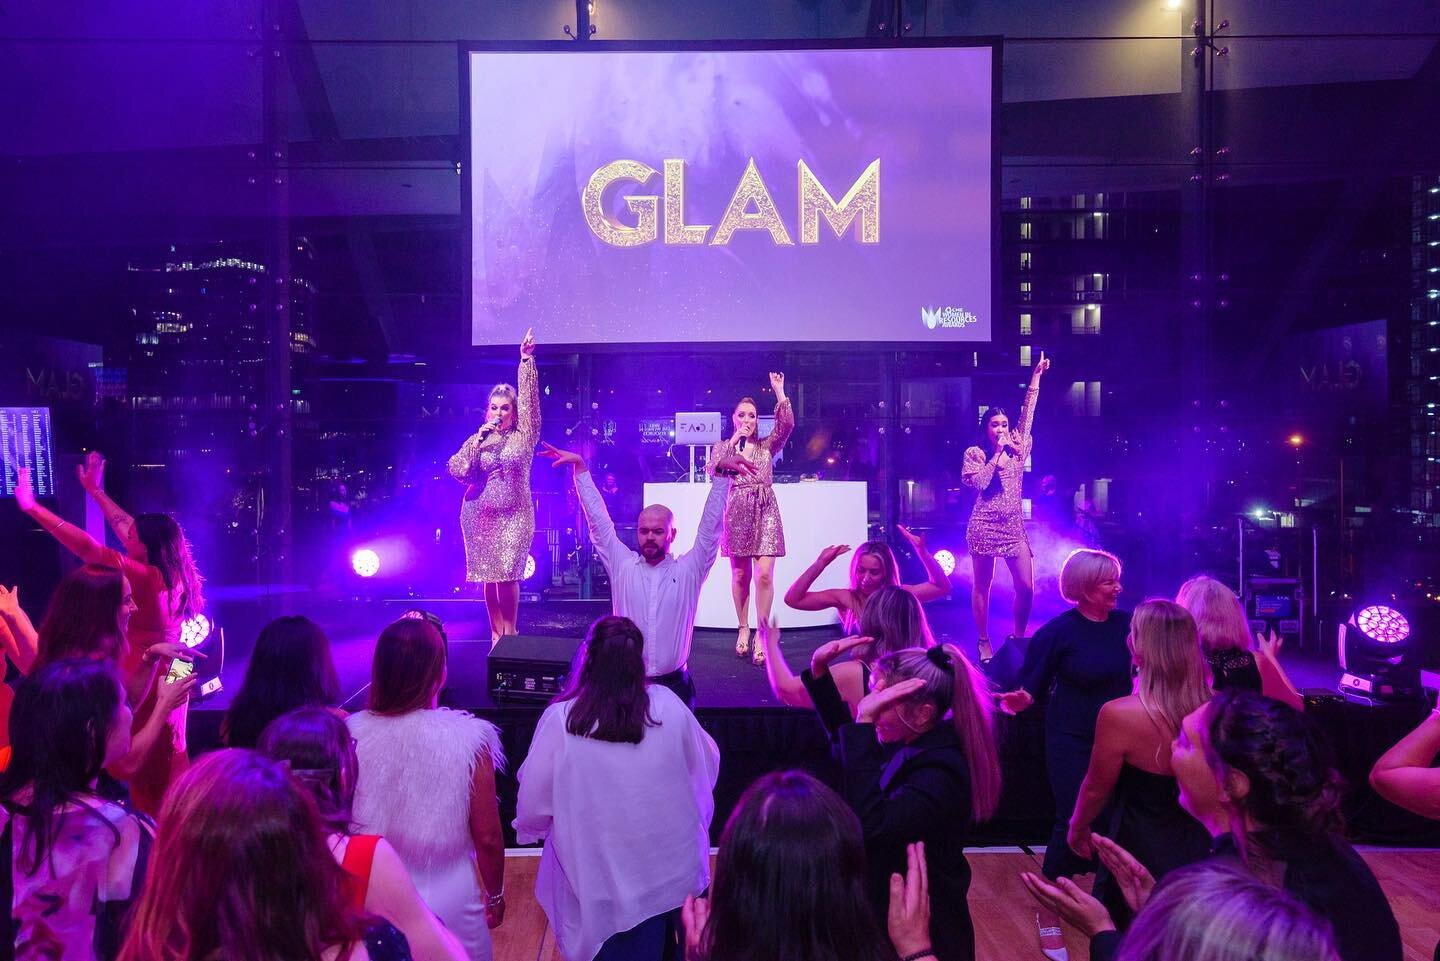 Now put your hands UP 🙌 

That GLAM energy 💫 We love it and we want to bring it to YOUR next dance floor 🪩

EOY enquiries coming in hot 🔥 Let us bring the spark with our sparkles ✨